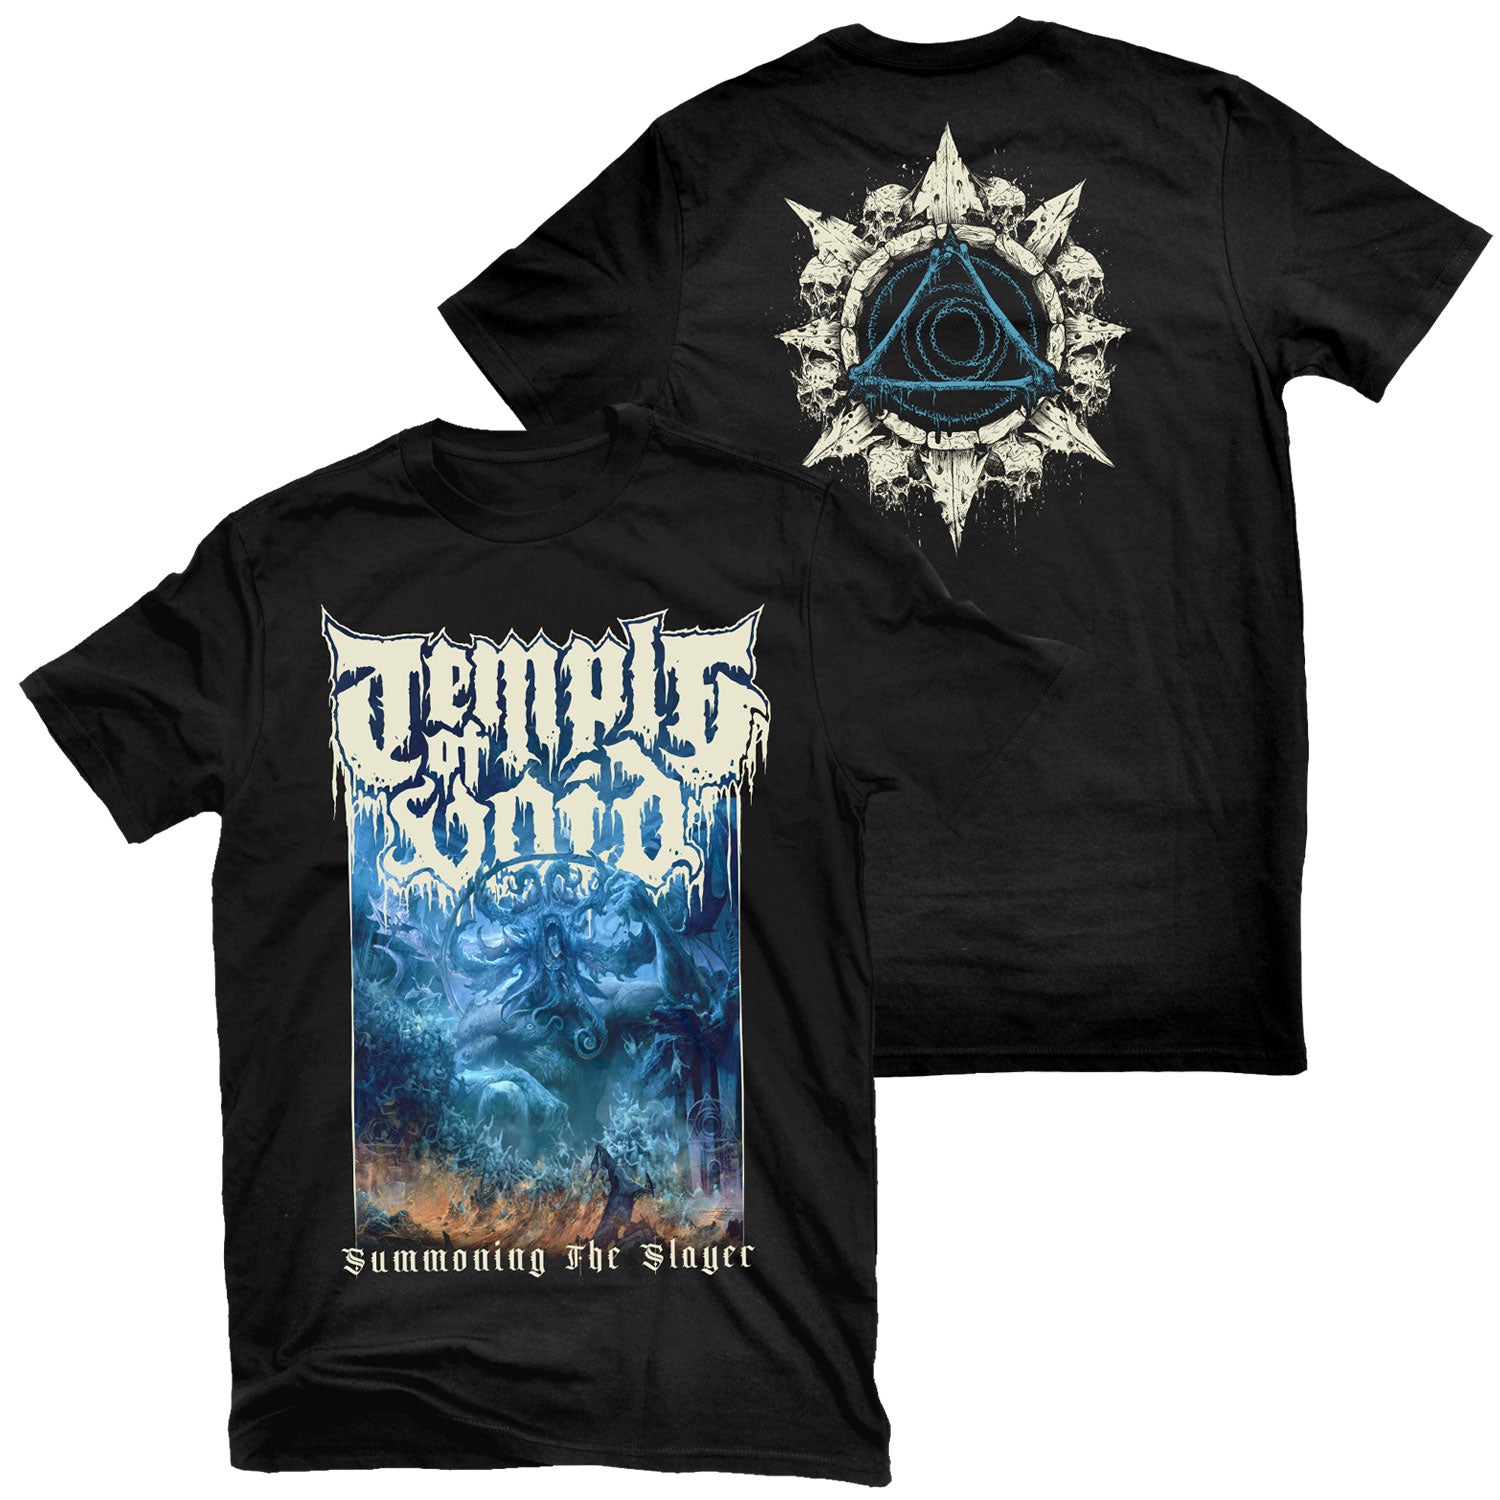 Temple of Void "Summoning the Slayer" T-Shirt